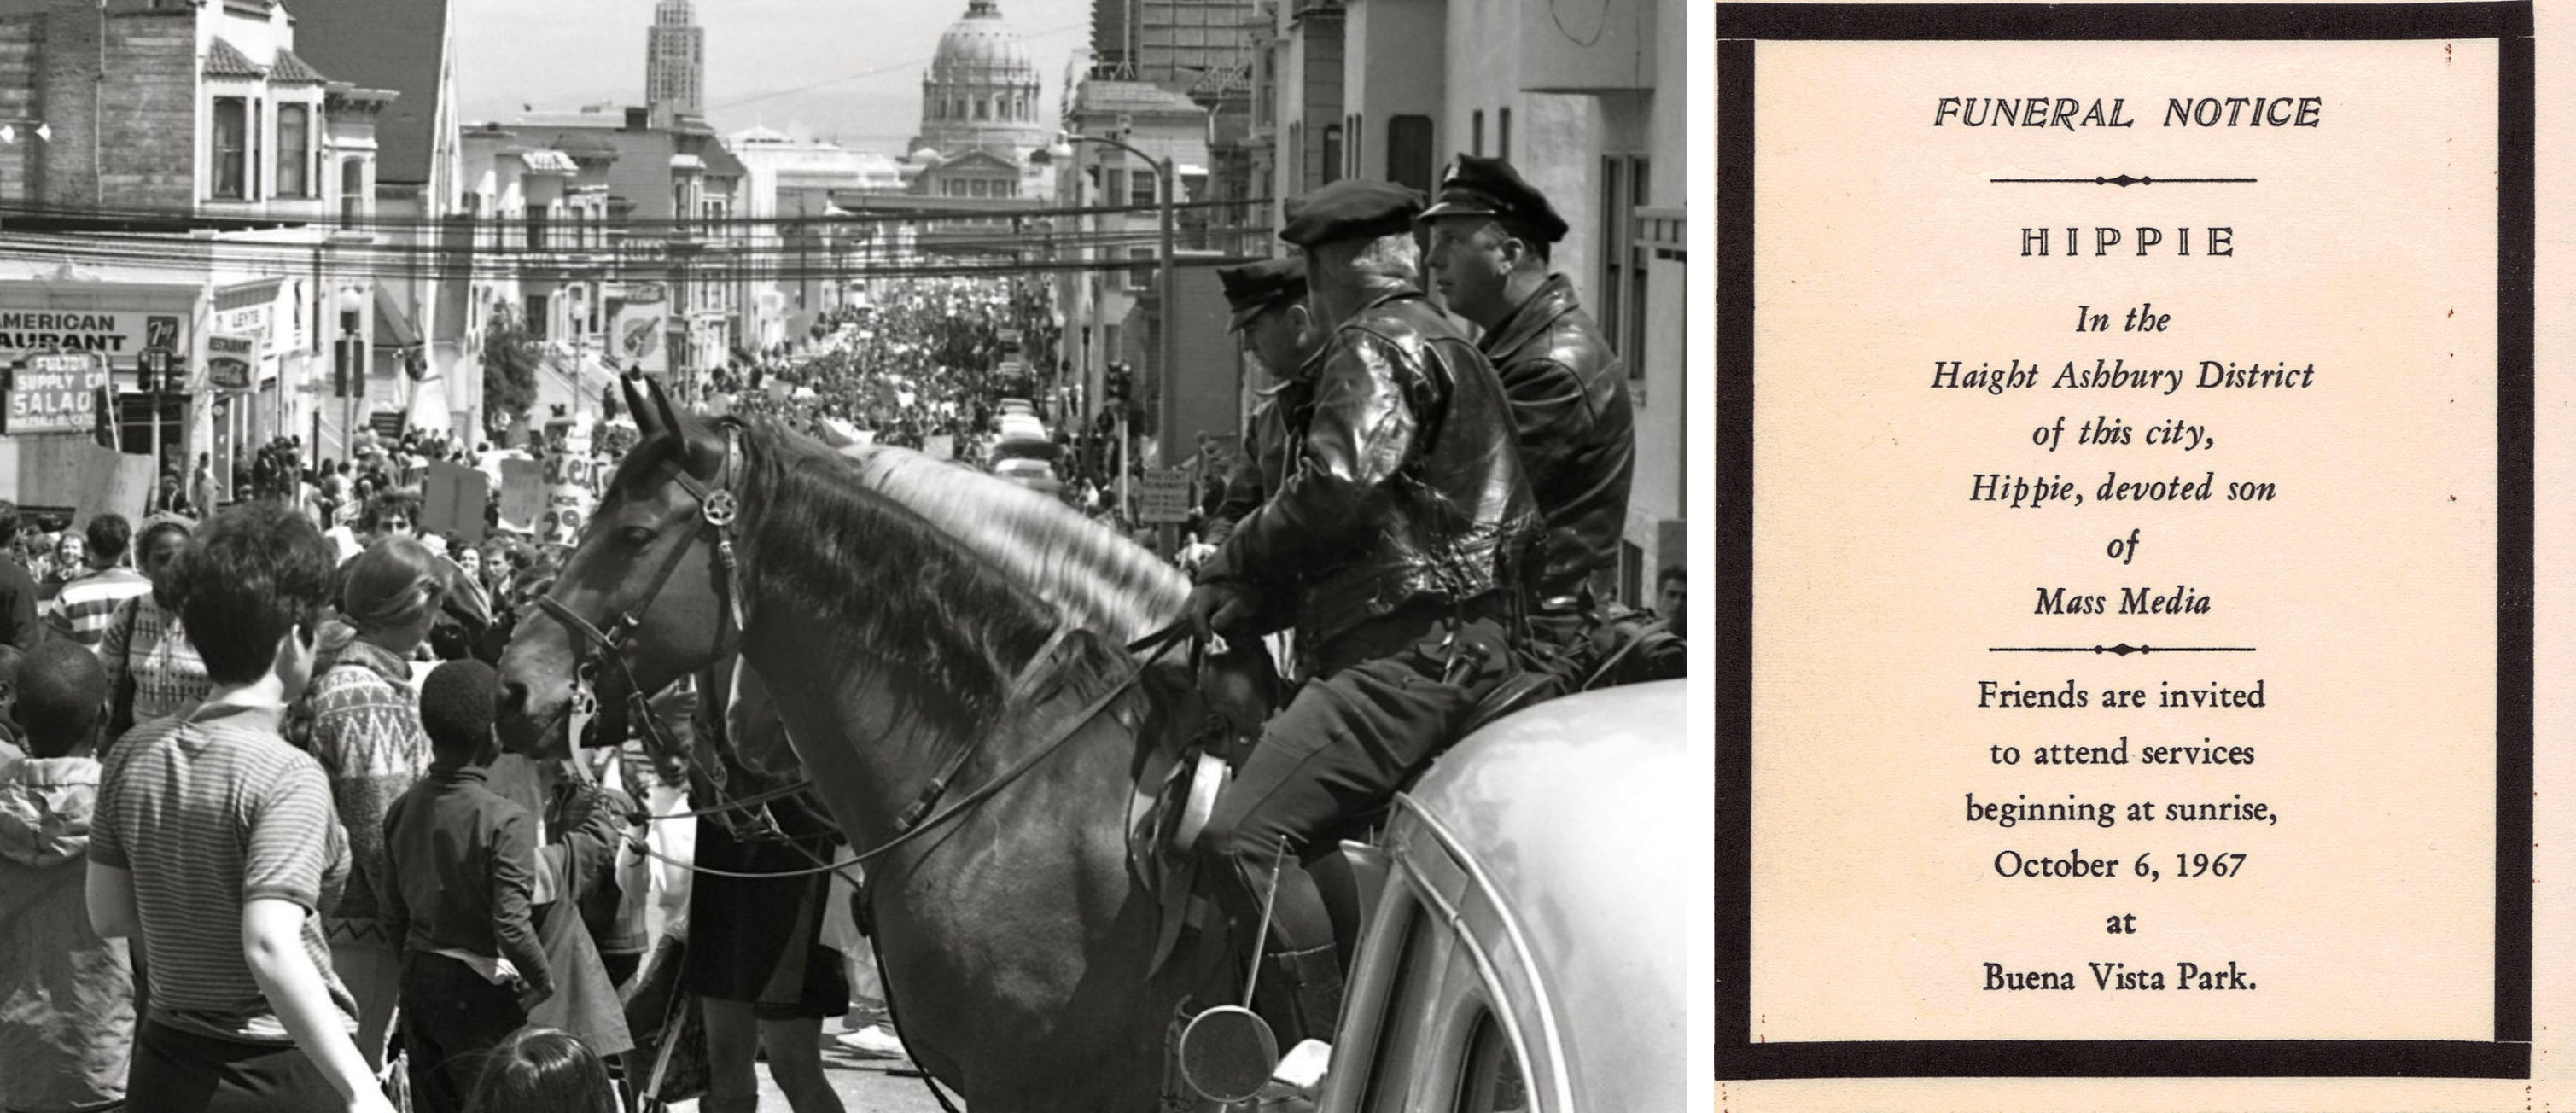 On the left, mounted police watch a Vietnam protest. On the right, a notice for a mock funeral held for the 'Death of the Hippie.'